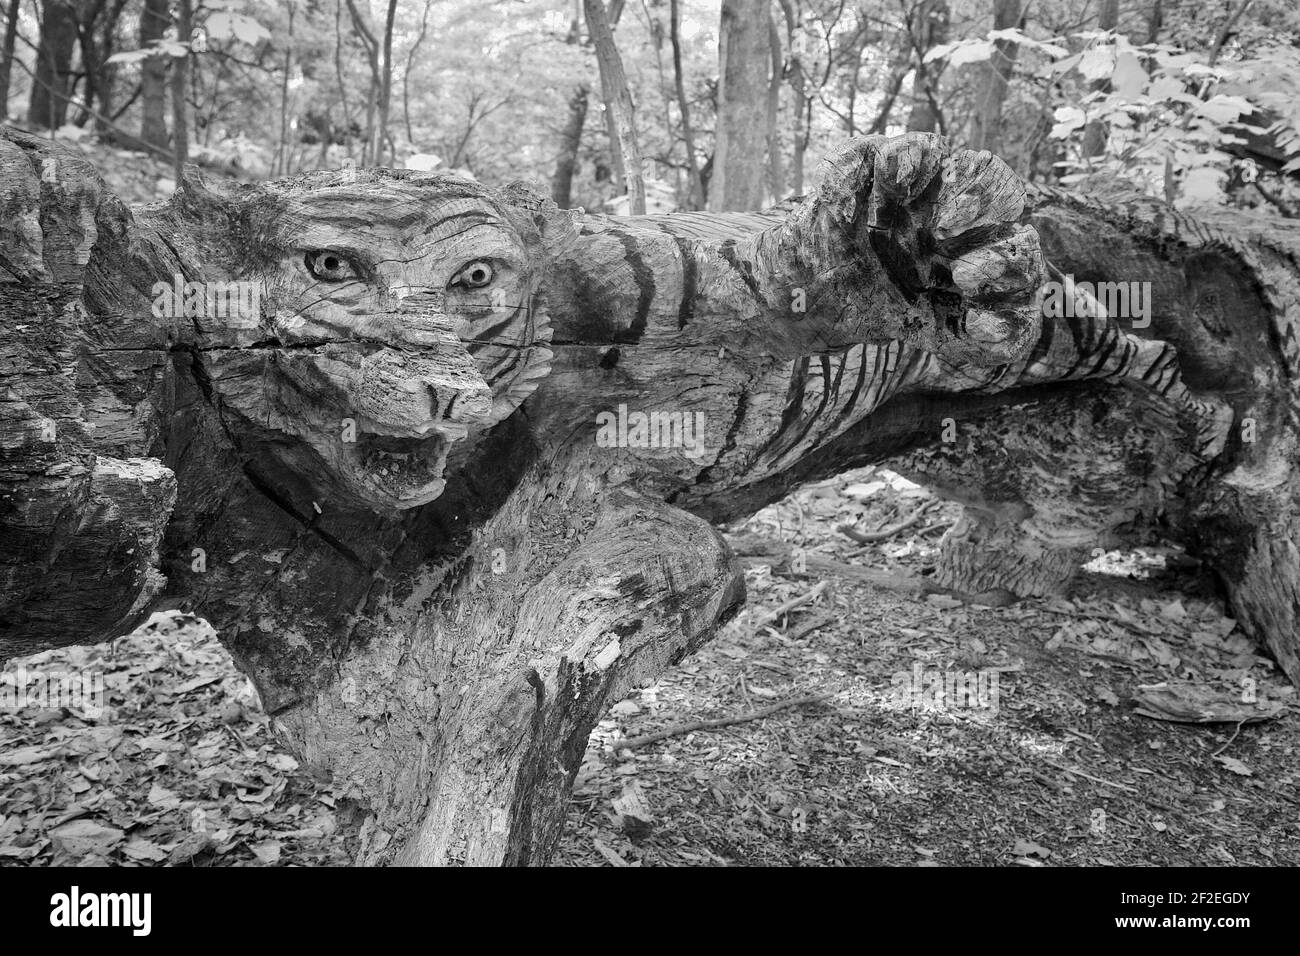 A carved tiger in a tree trunk in the woods. Stock Photo